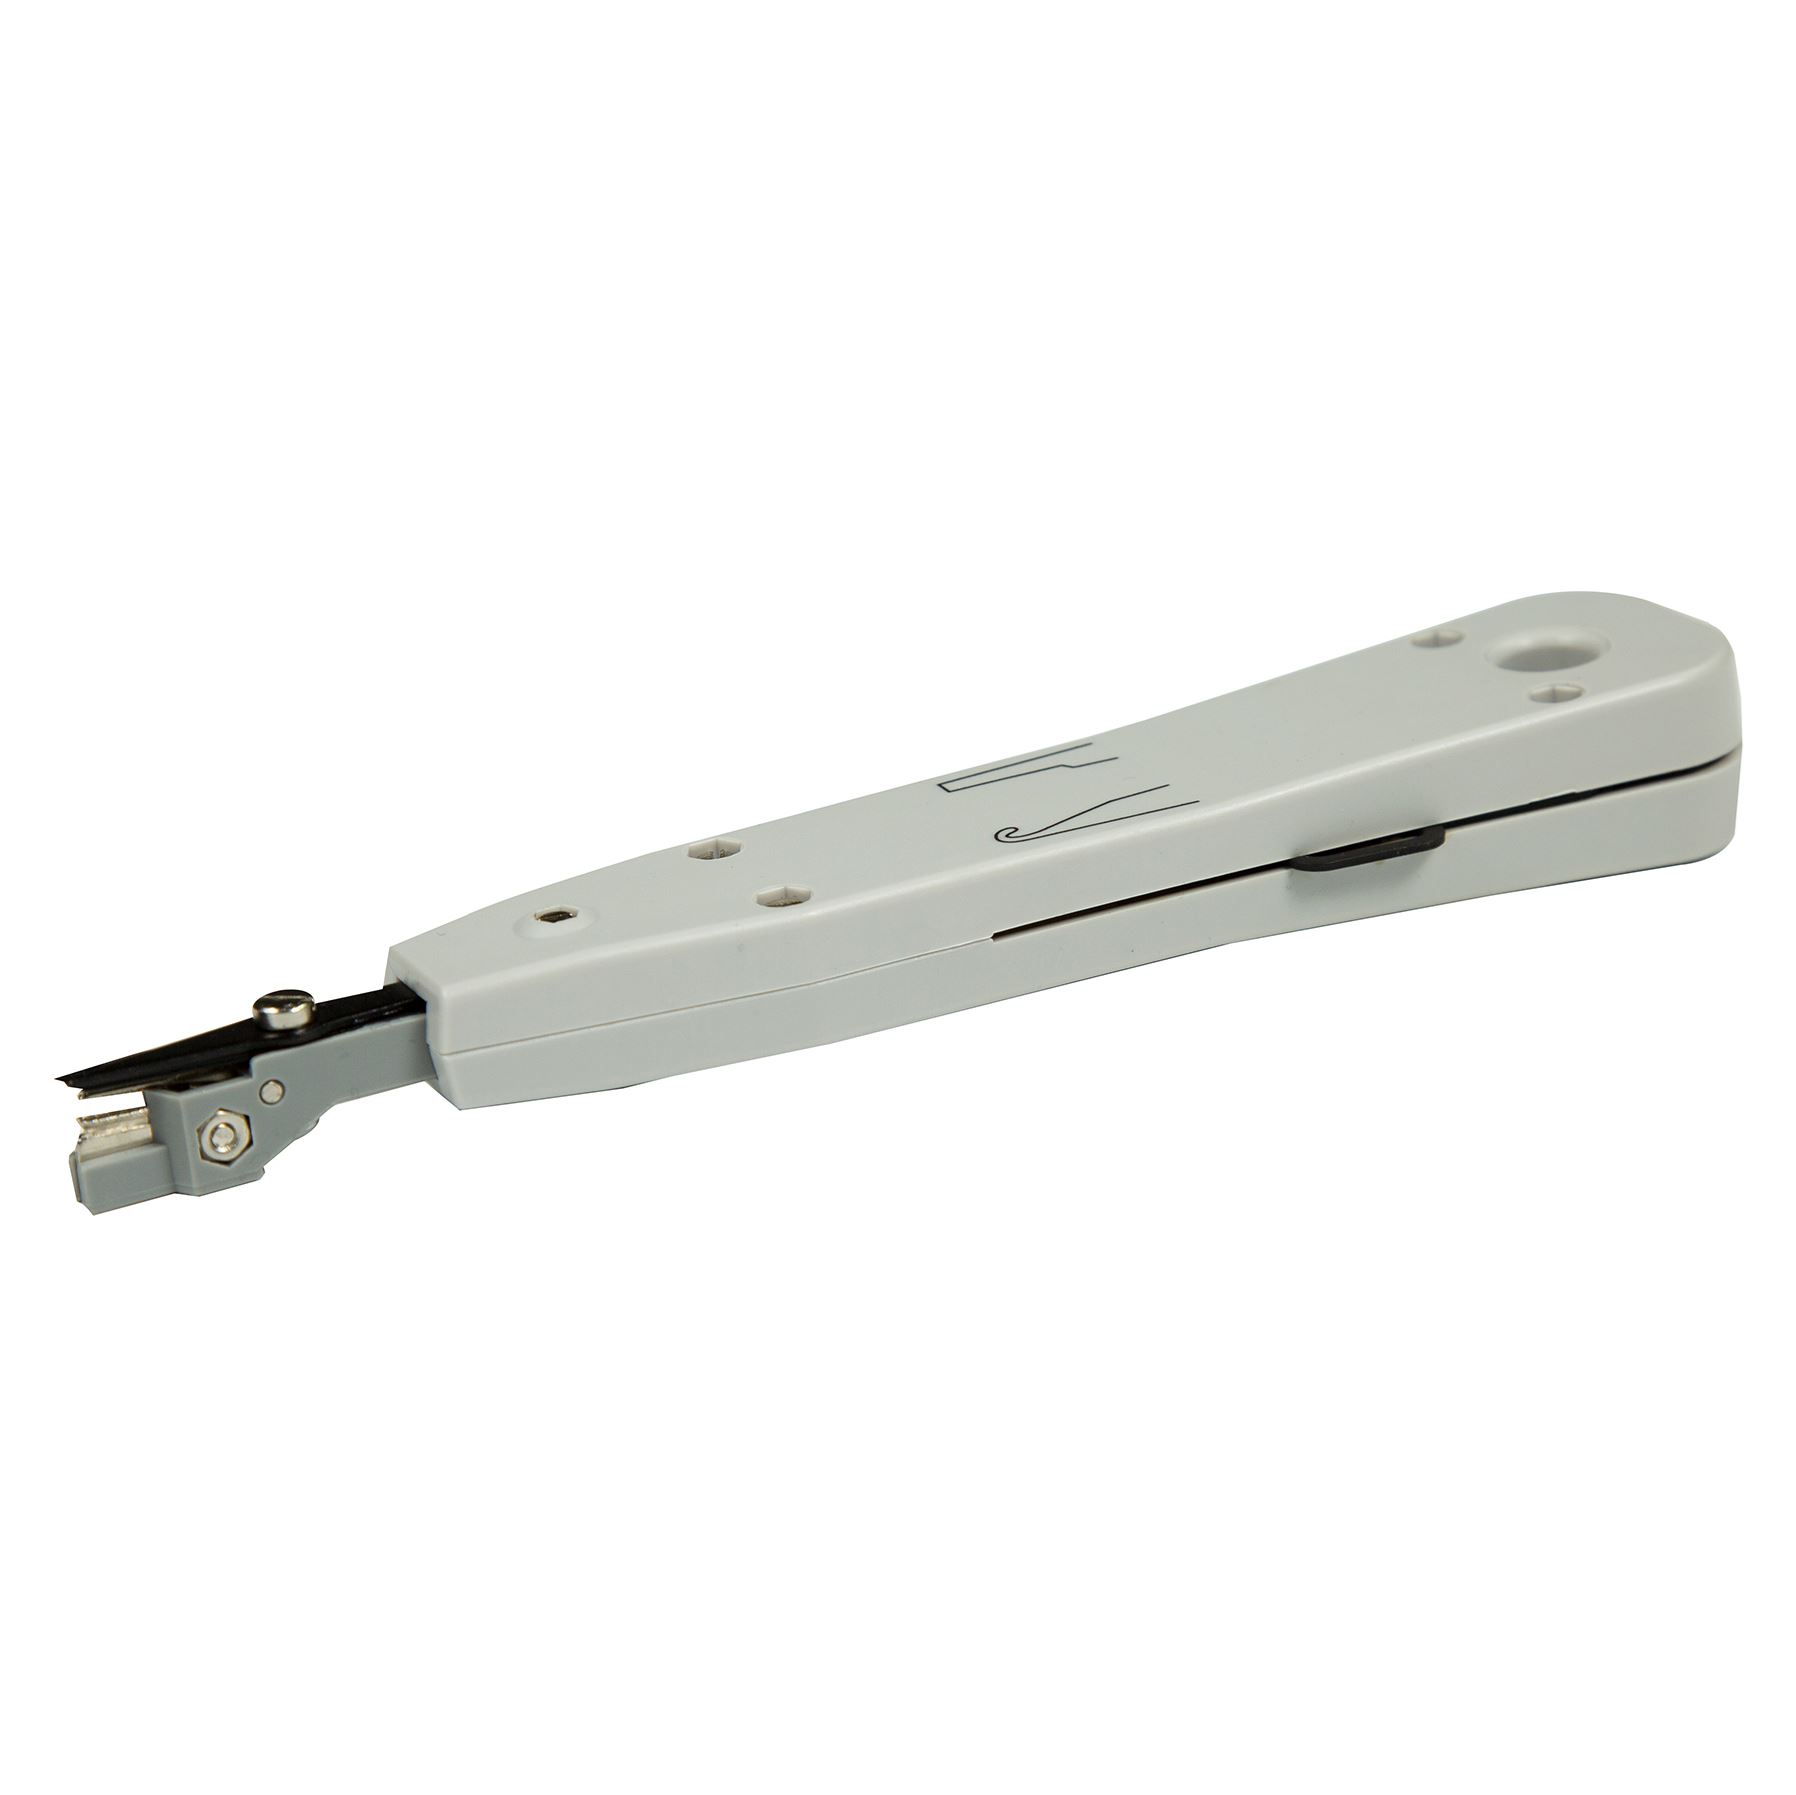 Punch Down Tool for Krone Blocks. Inserts & Cuts the Wire.Easy Push Down Action. SpringLoaded Mechanism. Includes Built-in